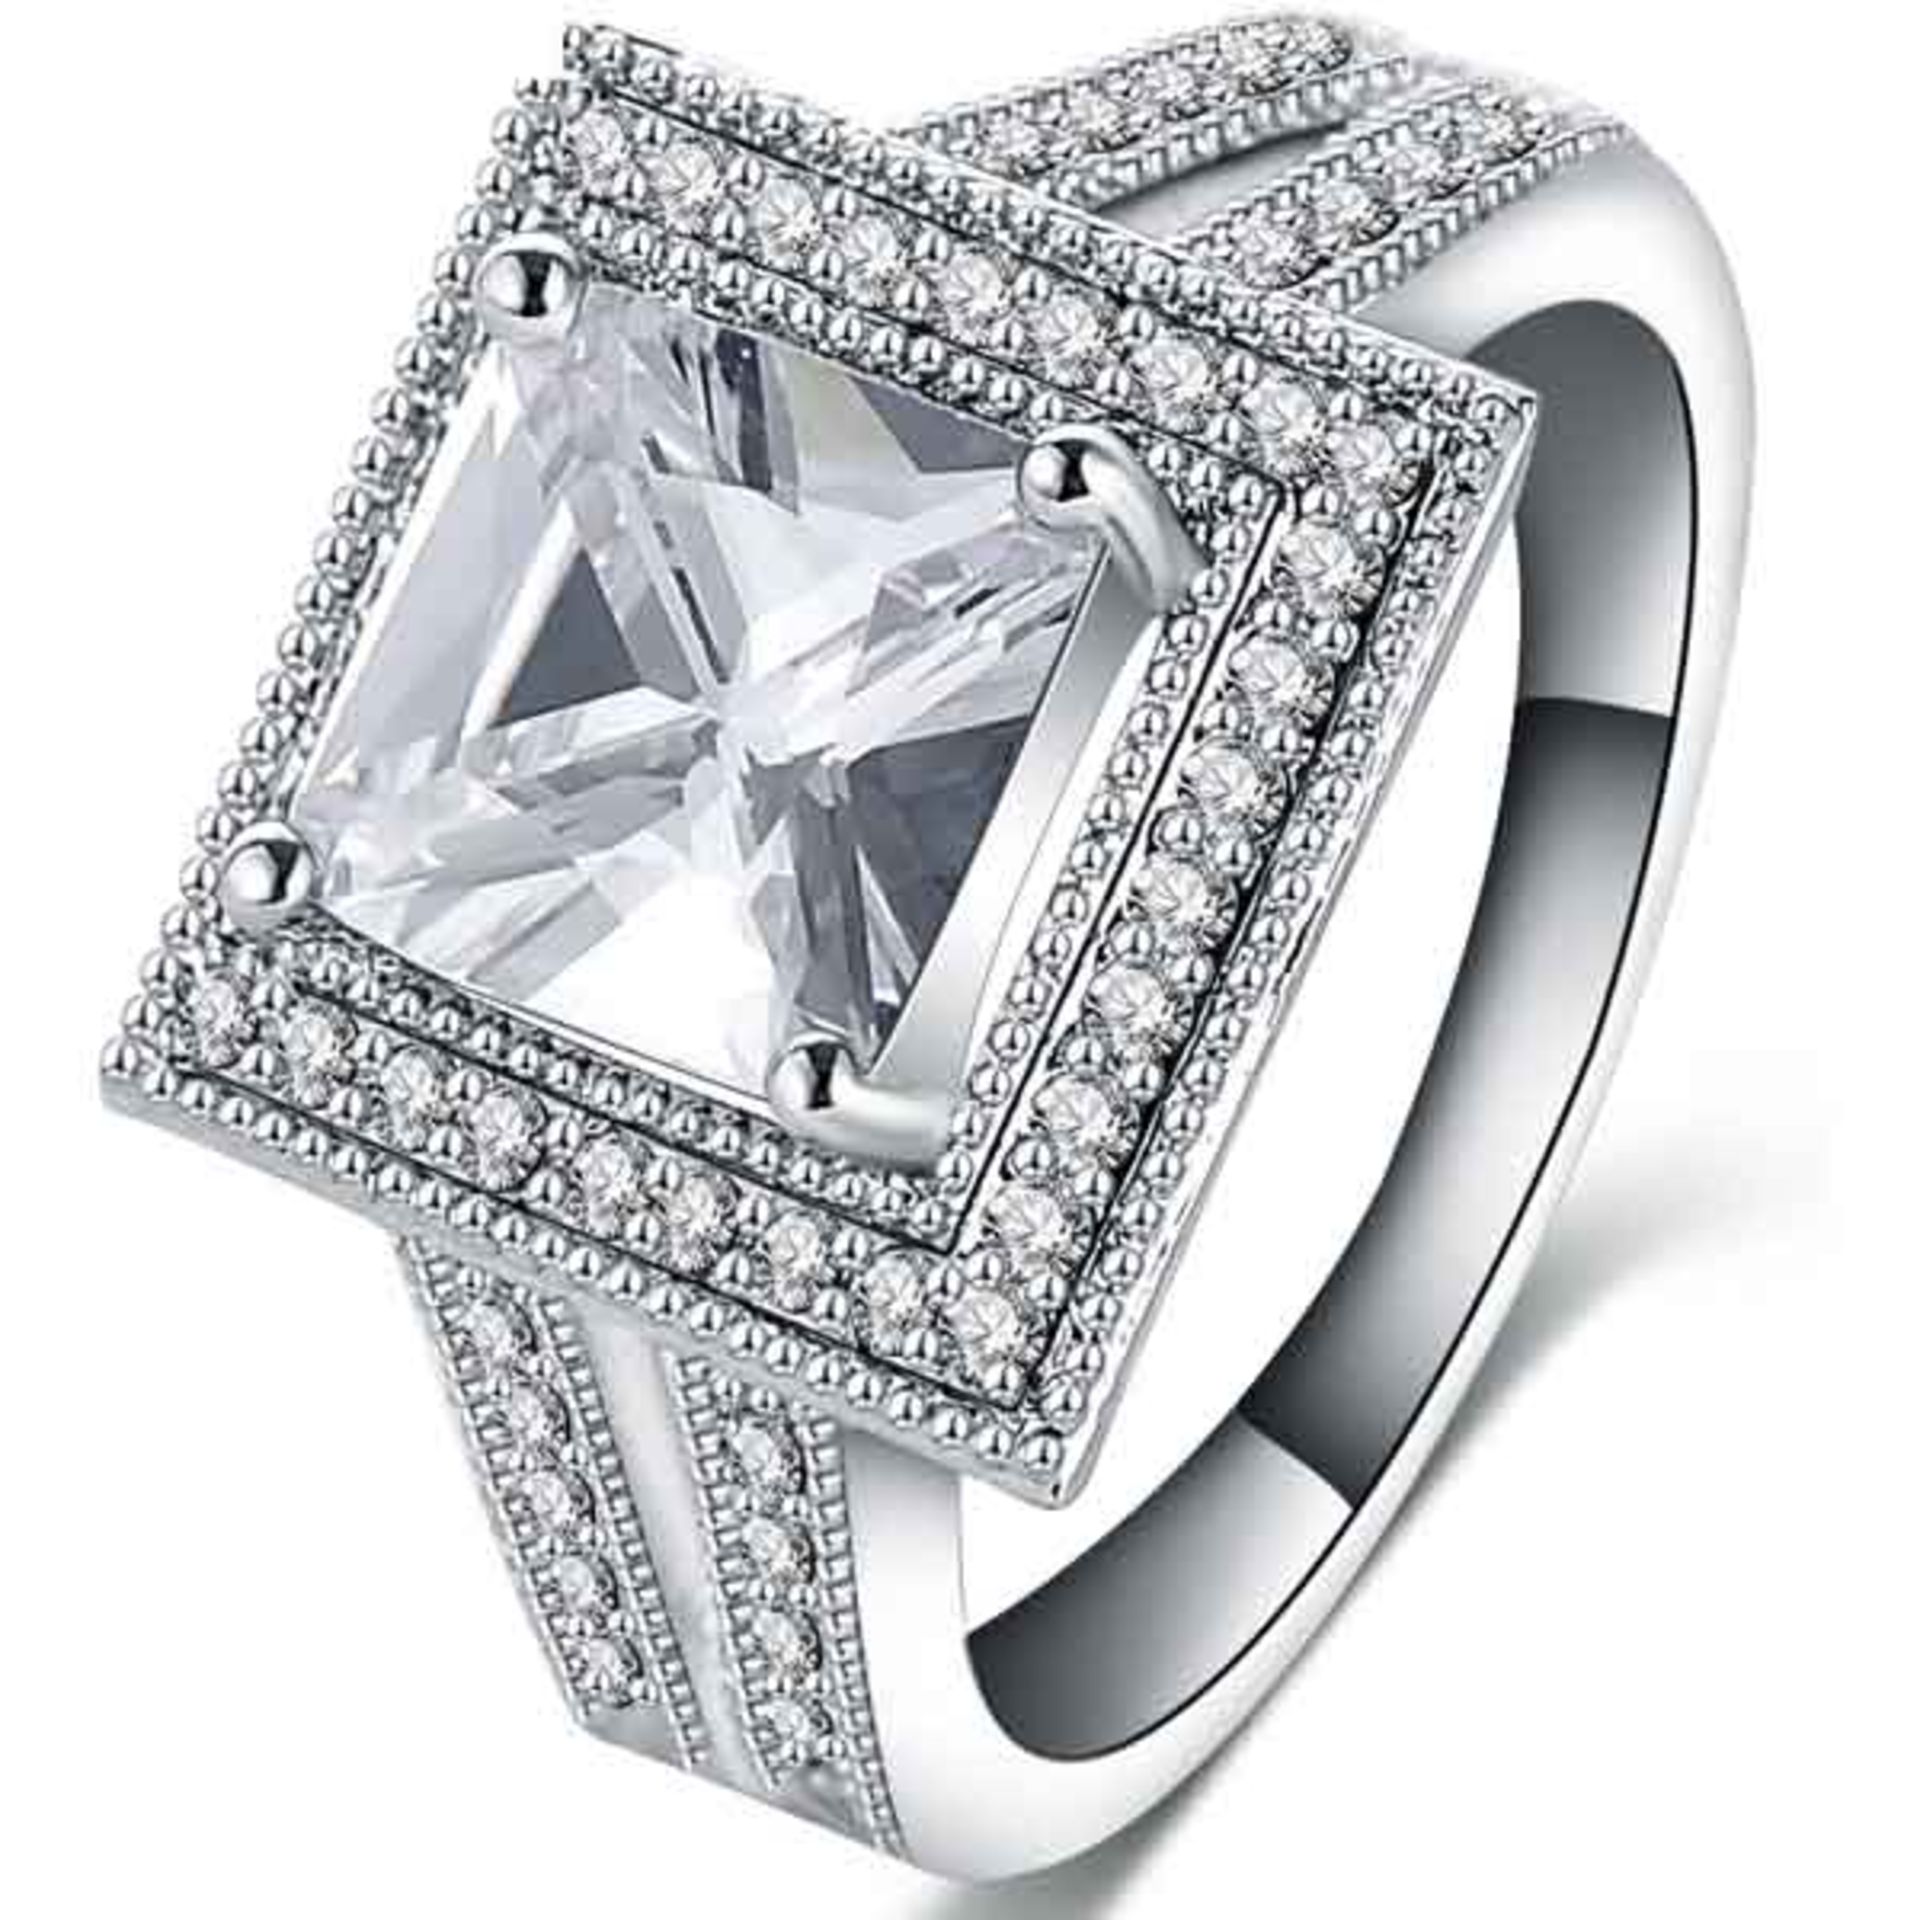 V Brand New Platinum Plated Square White Stone Ring X 2 YOUR BID PRICE TO BE MULTIPLIED BY TWO